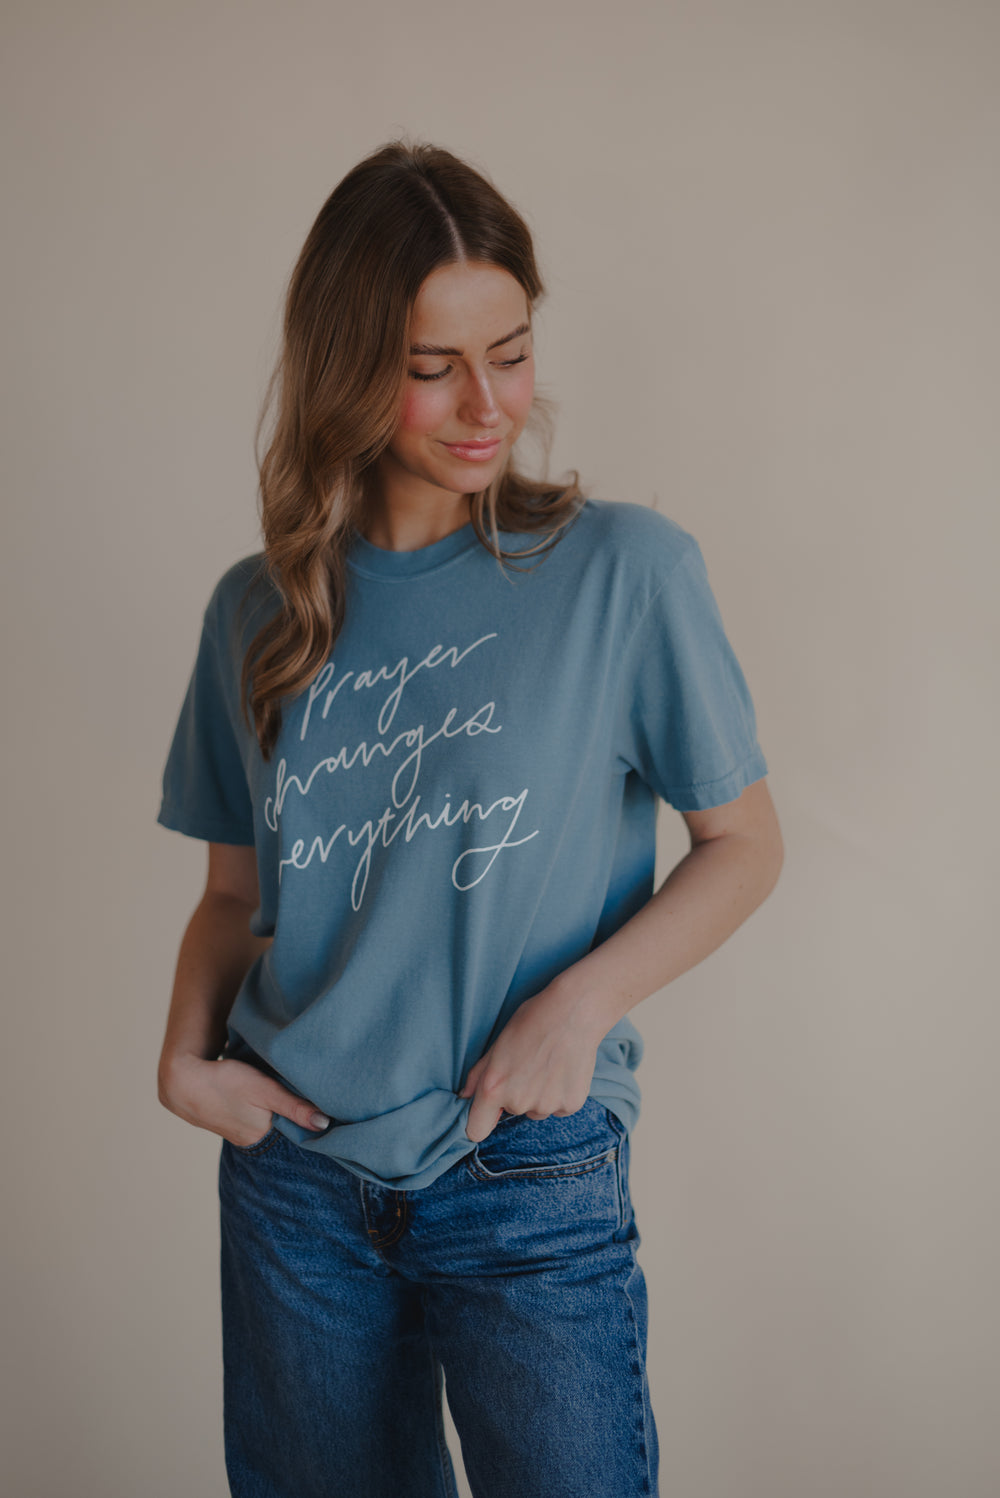 Prayer Changes Everything Tee - Ice Blue